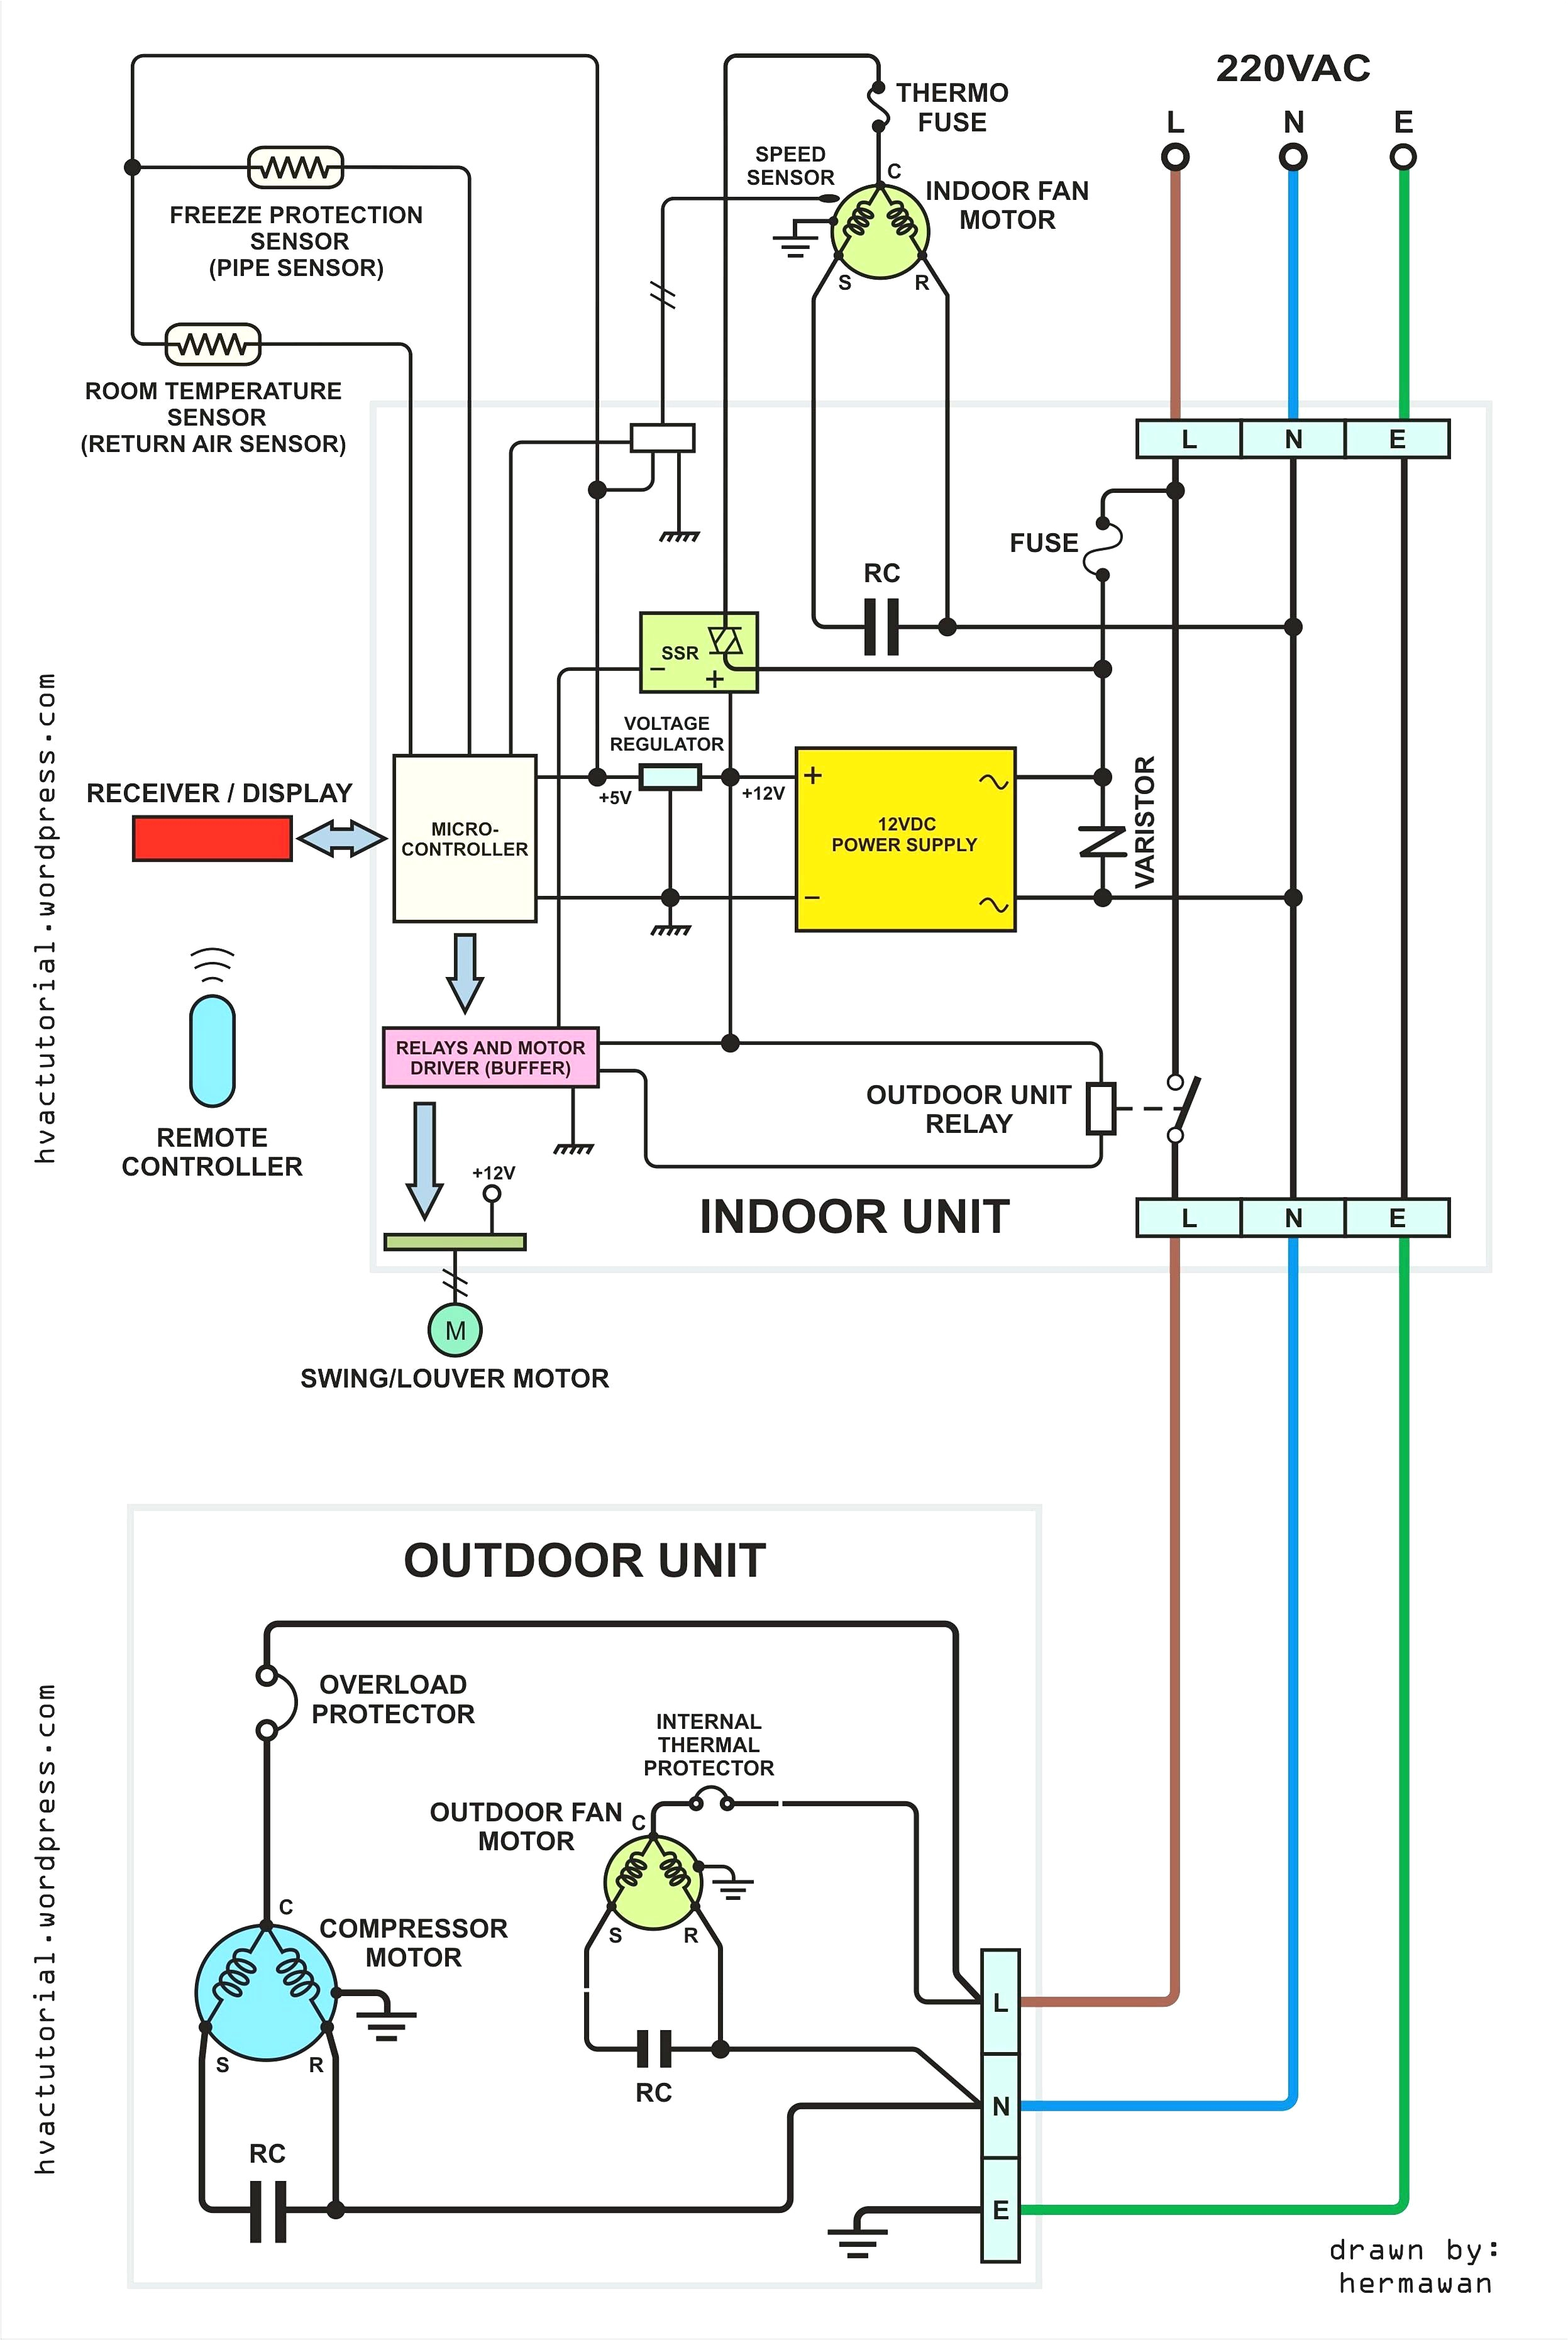 How to Read Hvac Wiring Diagrams Residential Electrical Wiring Diagrams Hvac Wiring Diagram